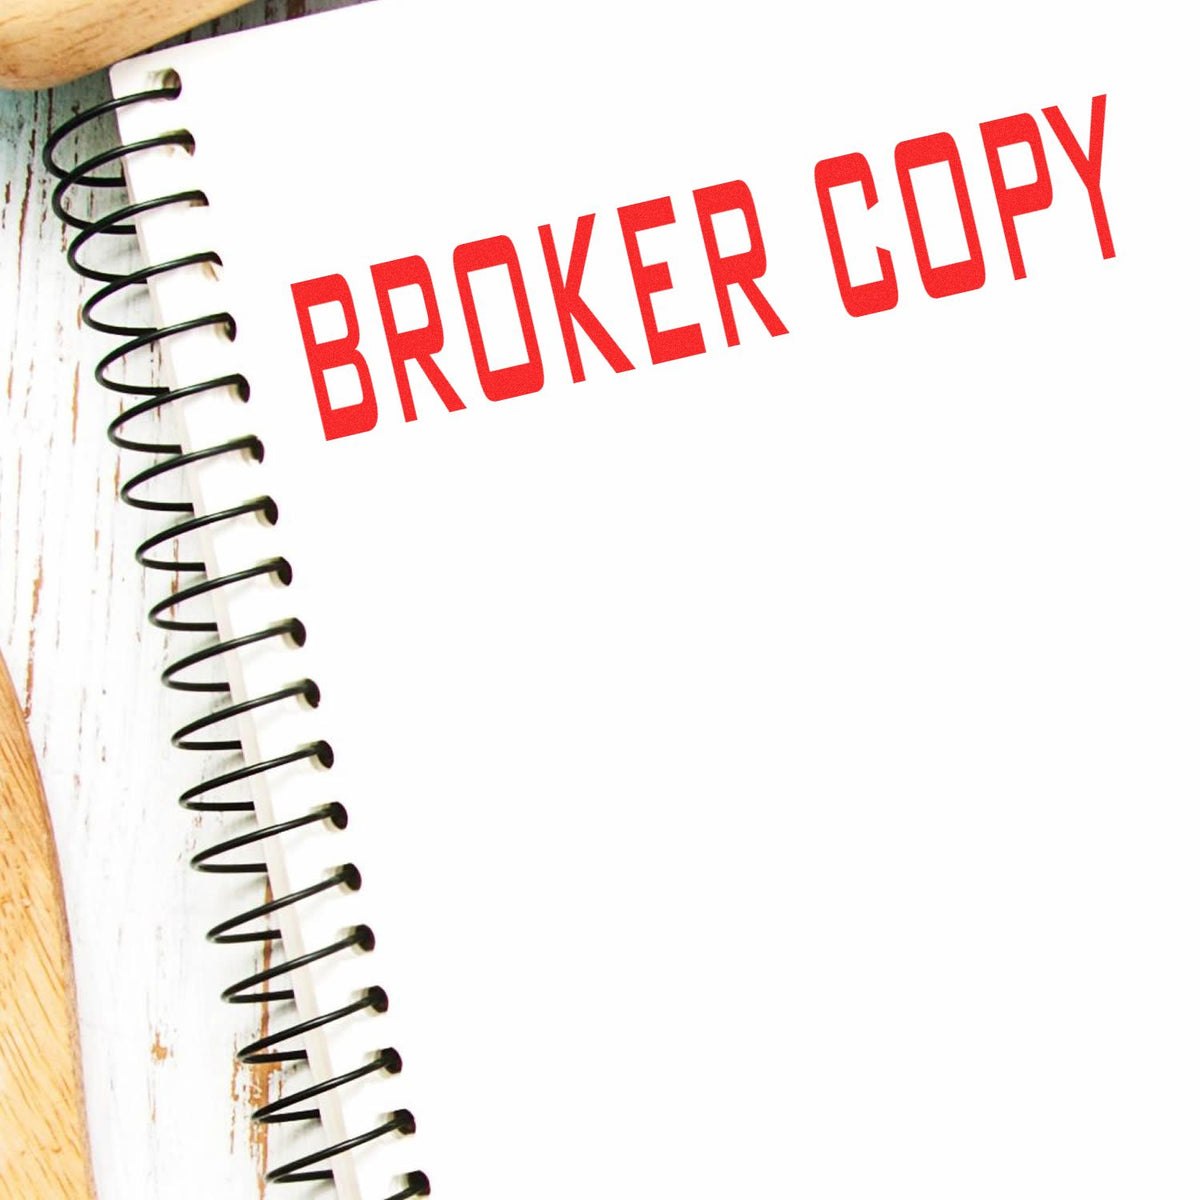 Large Self-Inking Broker Copy Stamp In Use Photo